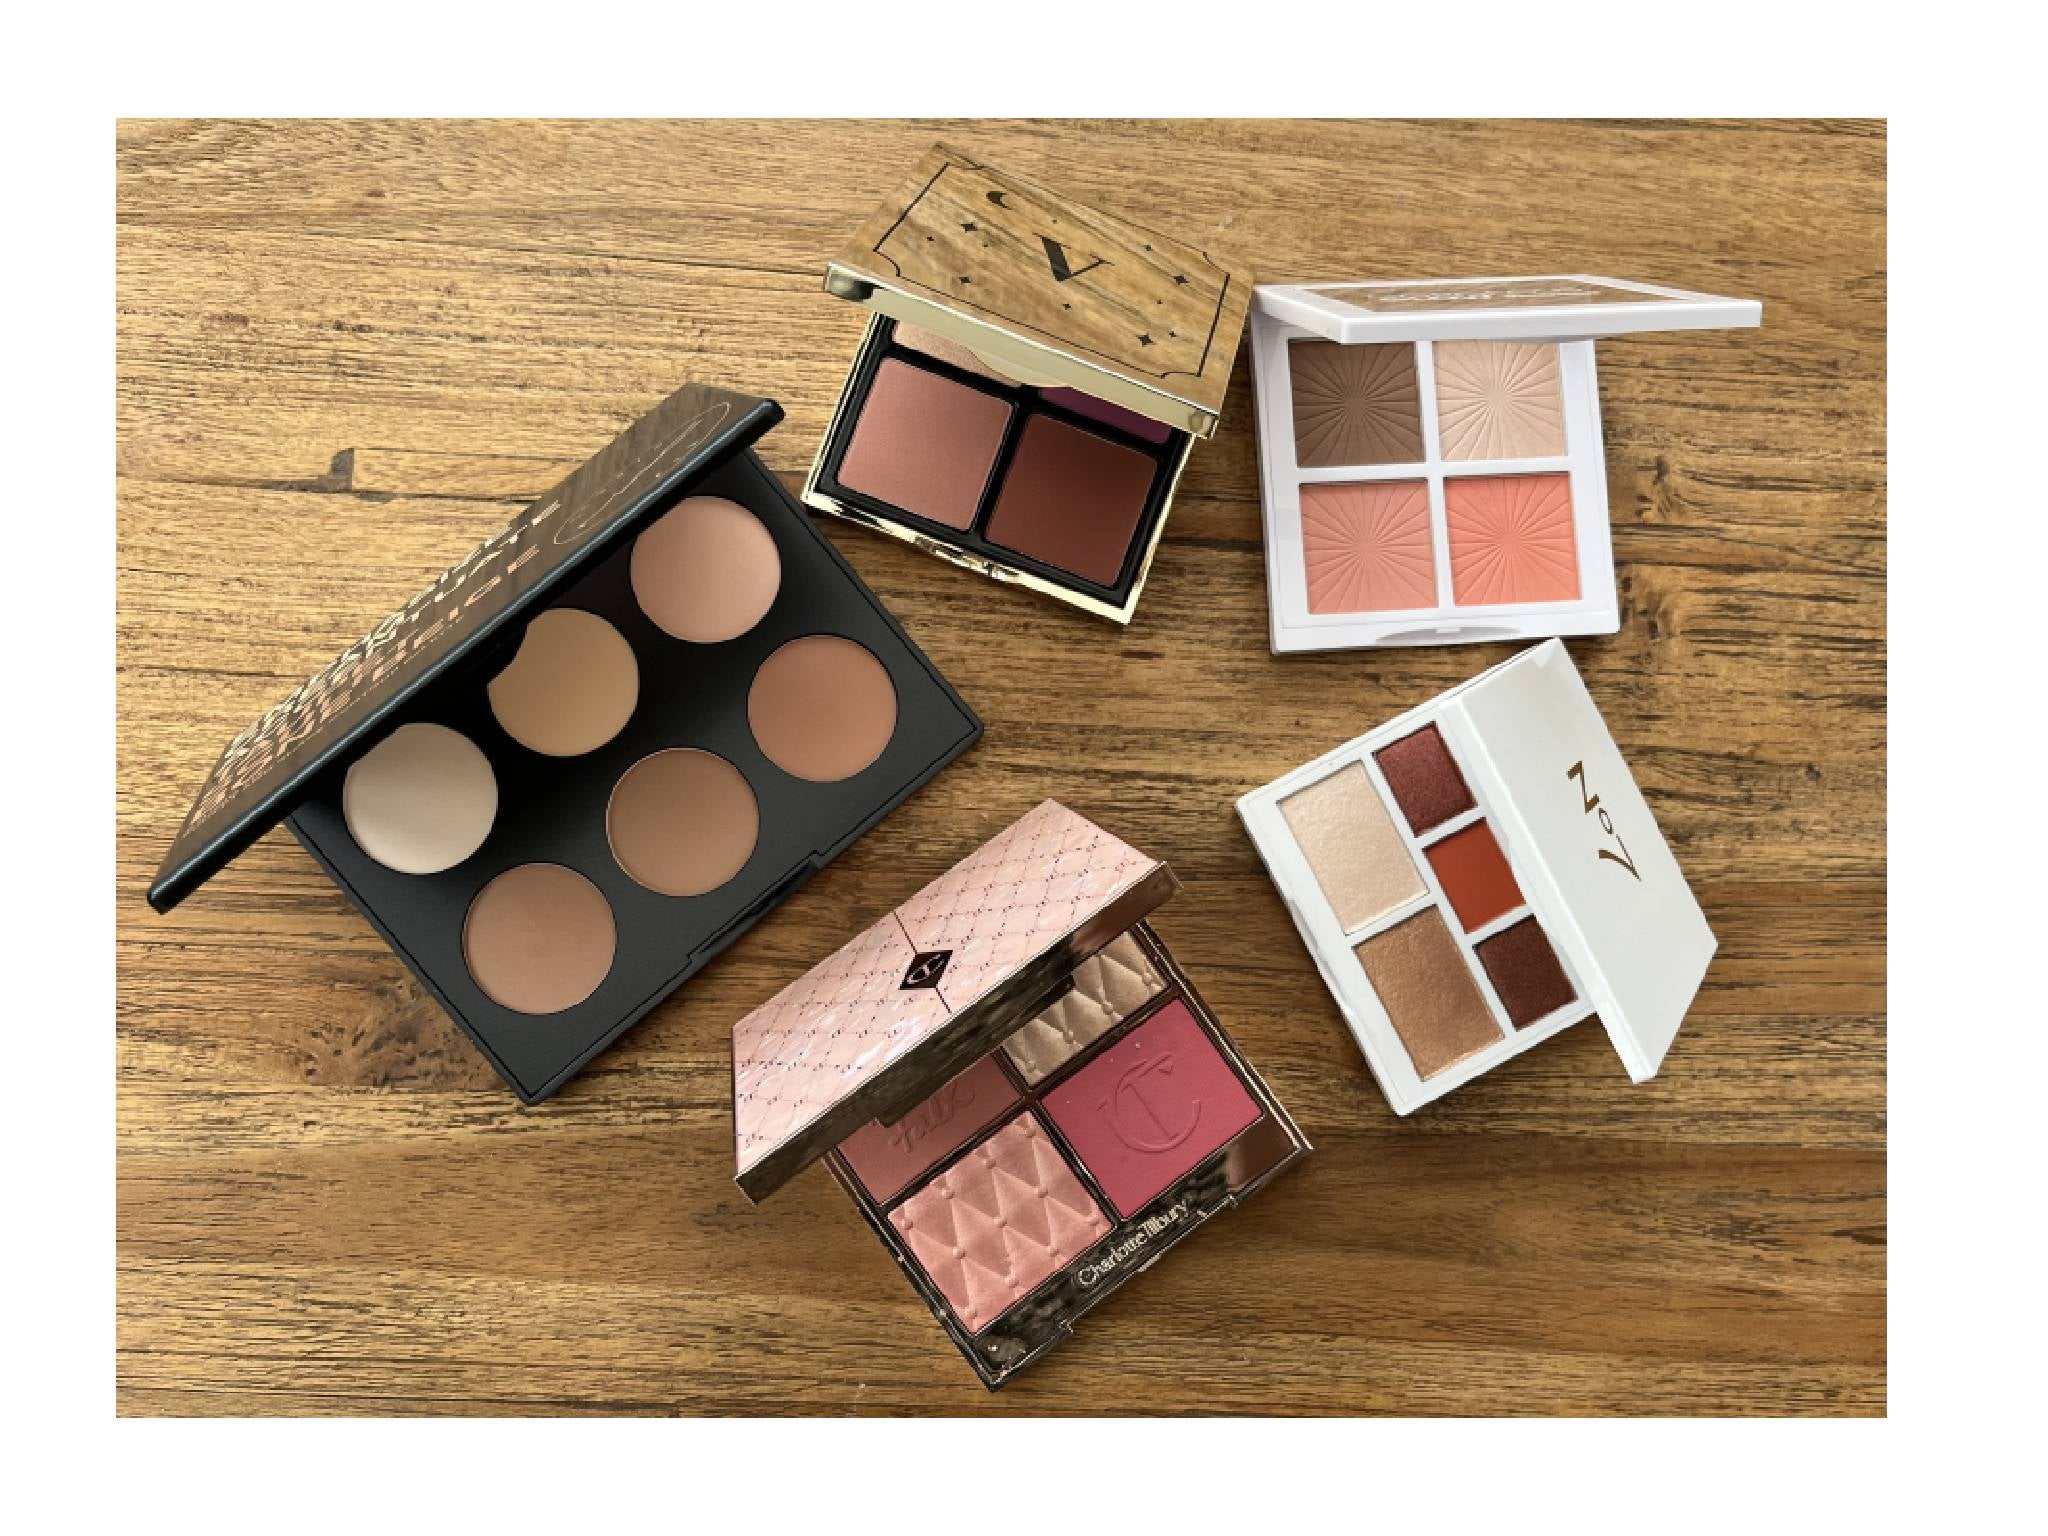 A selection of the best face palettes that we tested for this review